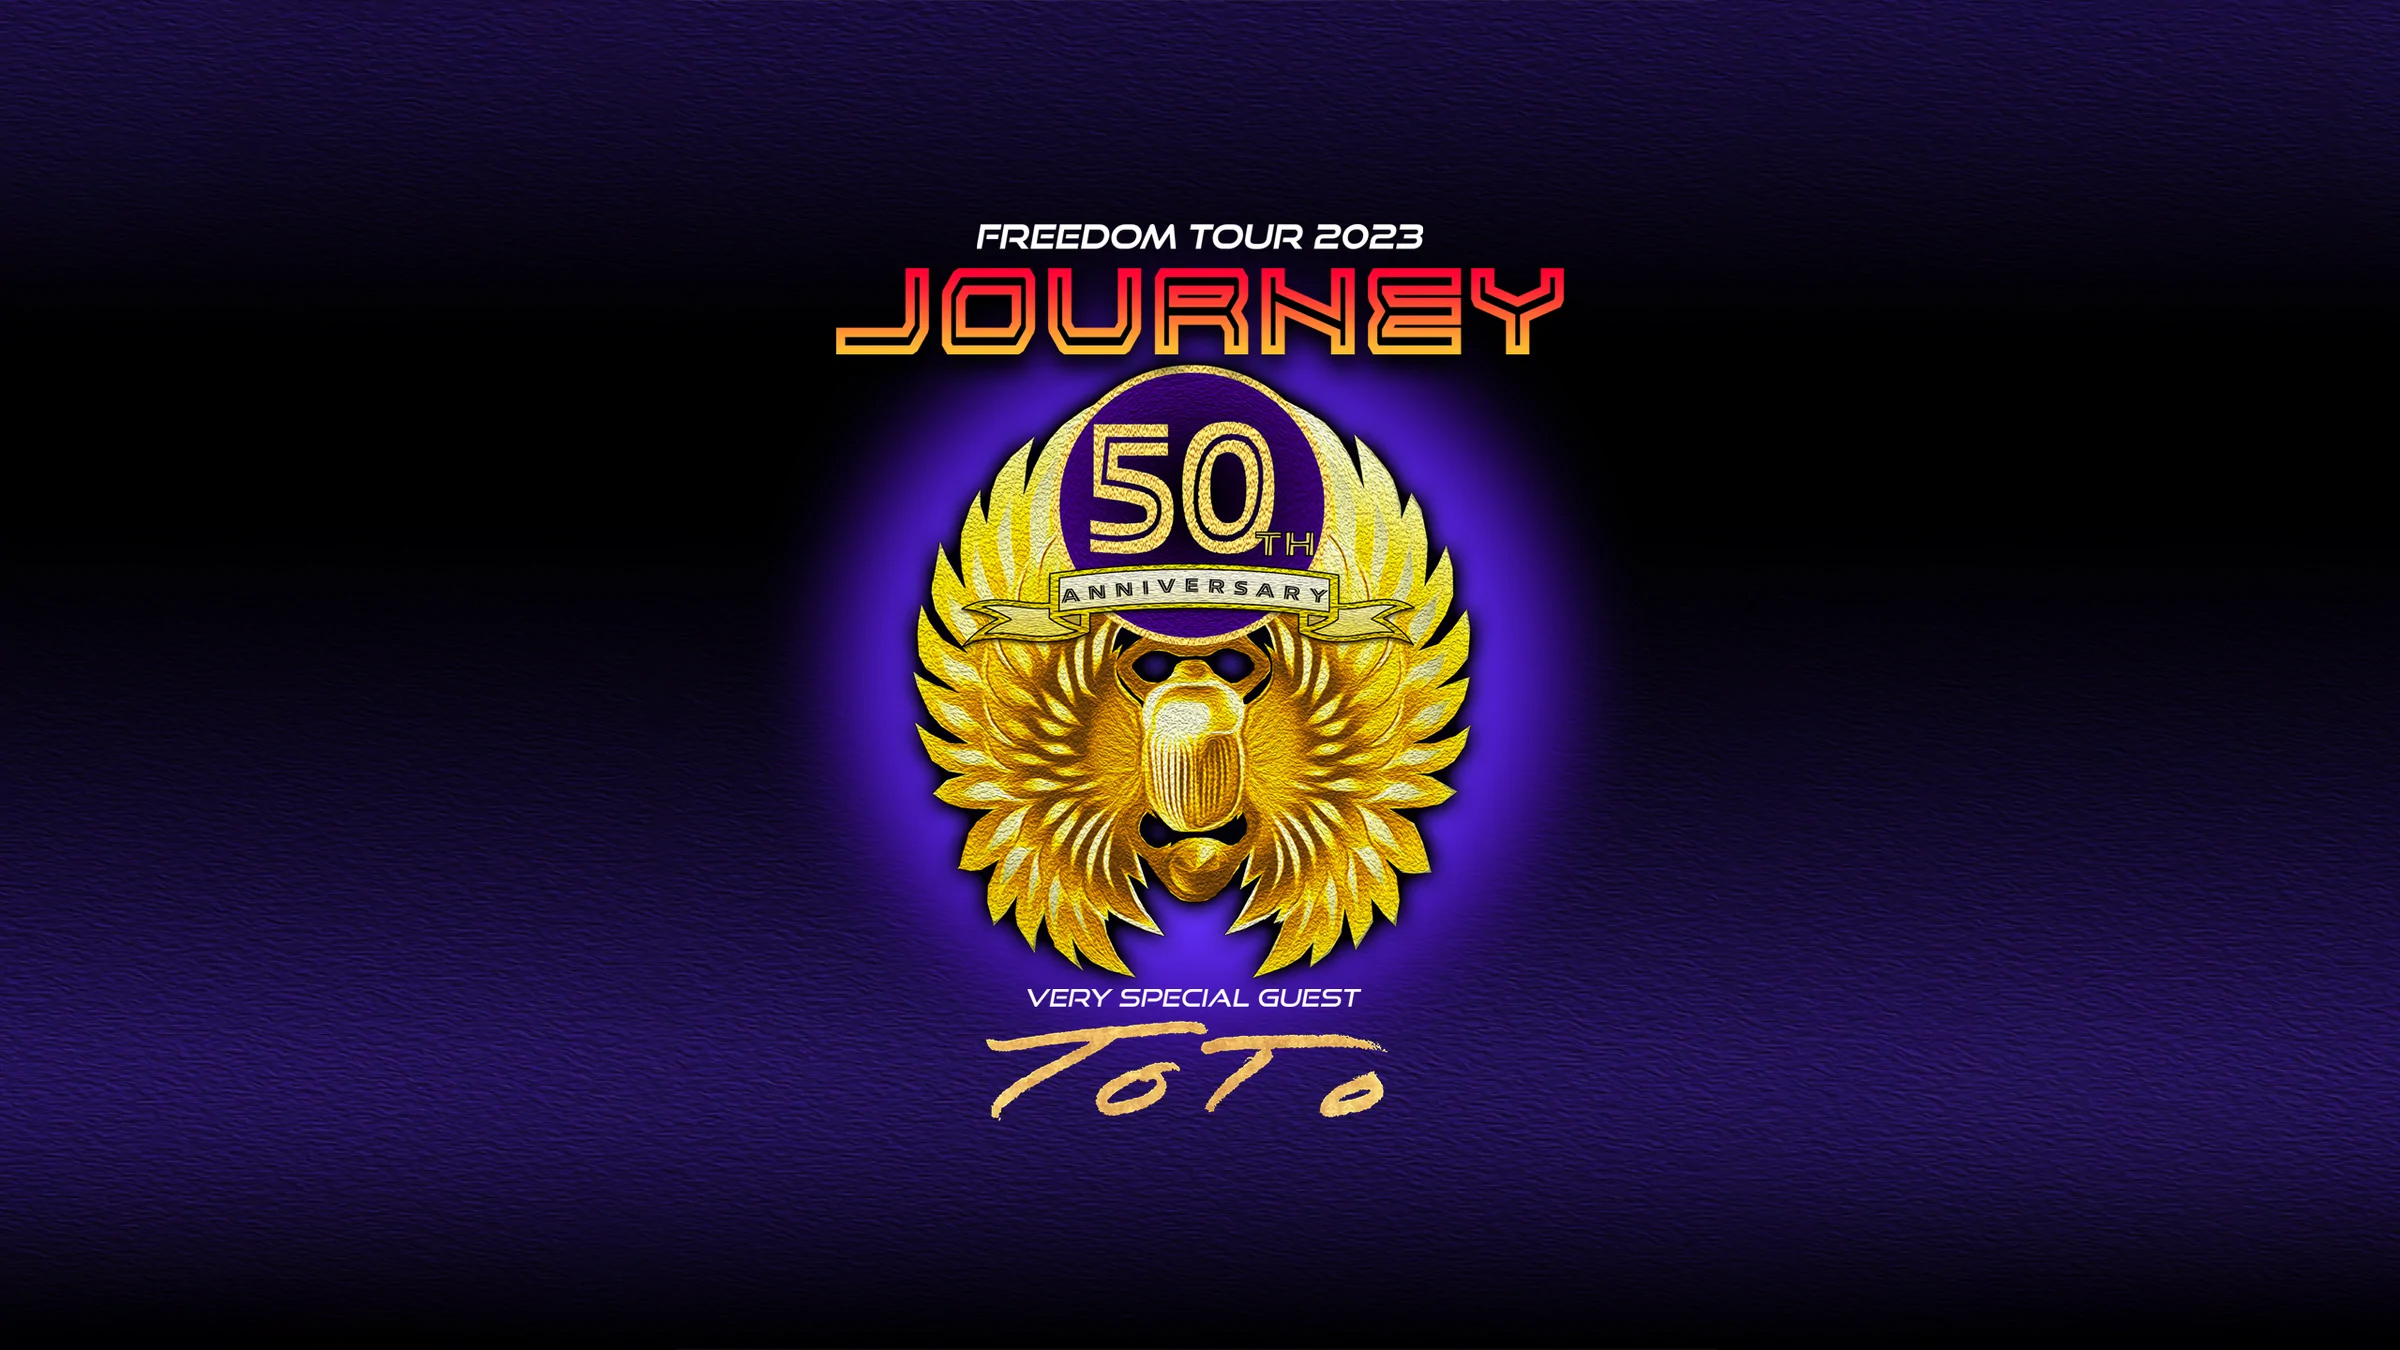 journey freedom tour with toto